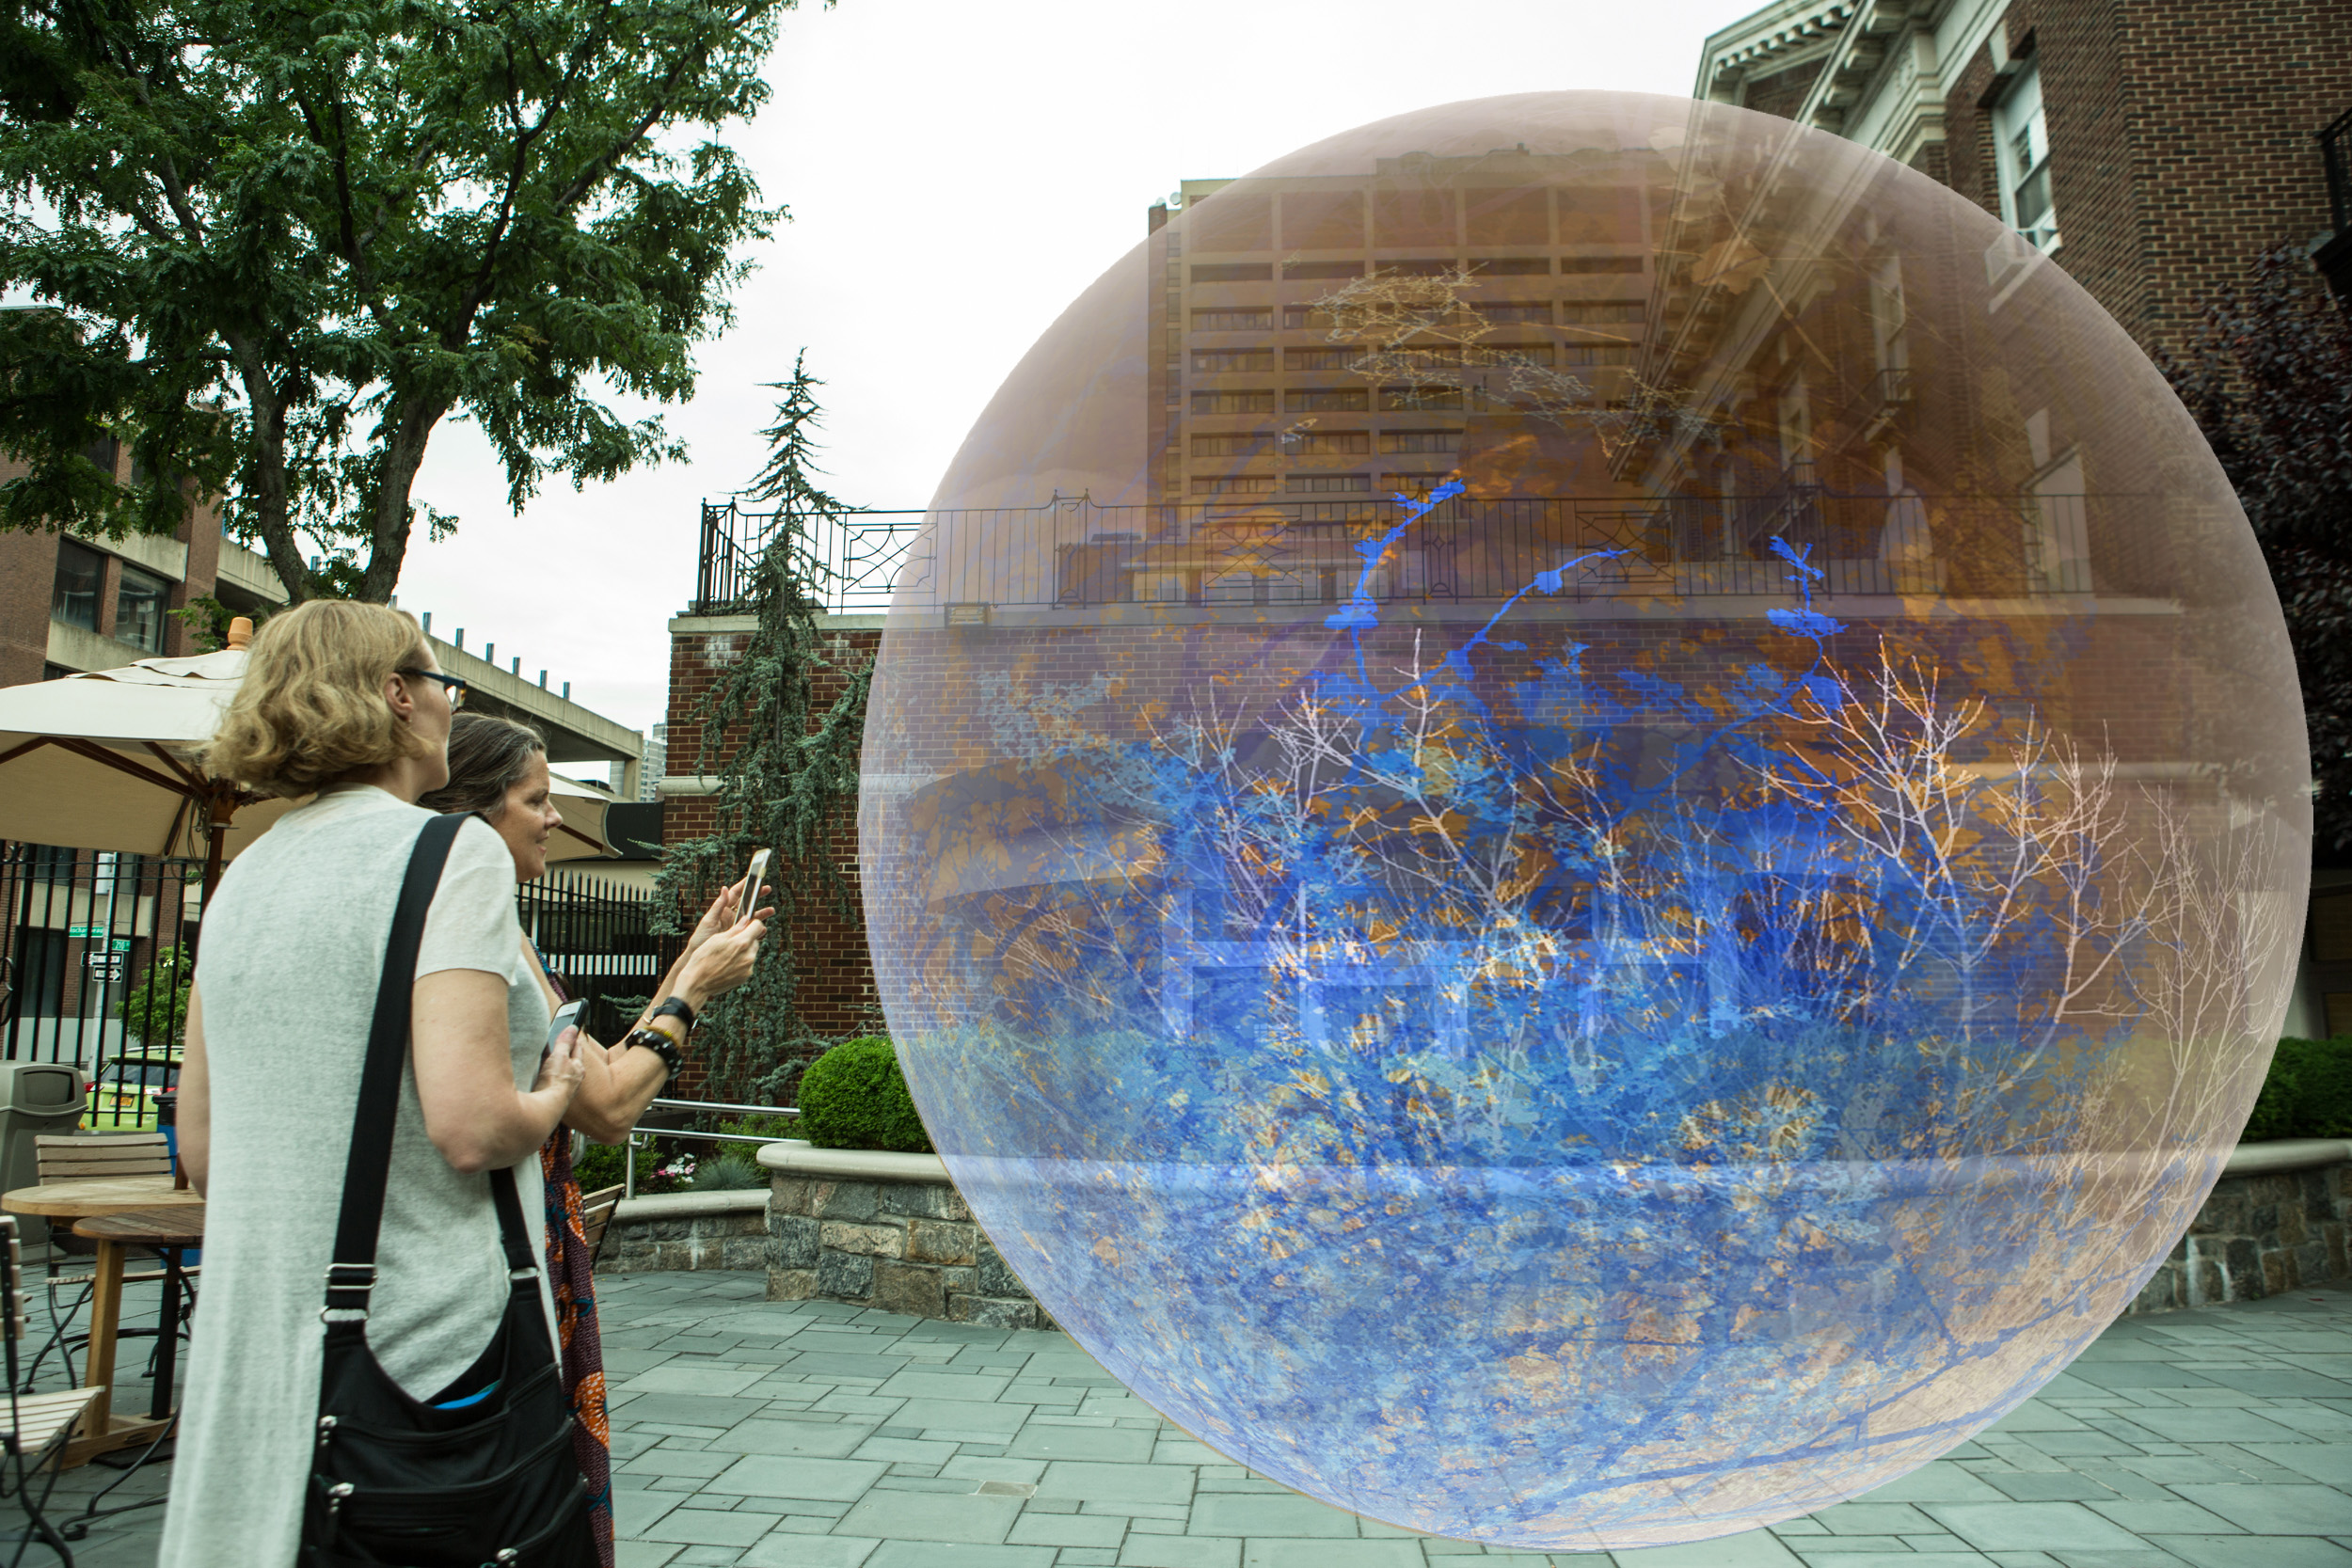 Daydreams: An Augmented Reality Art Installation